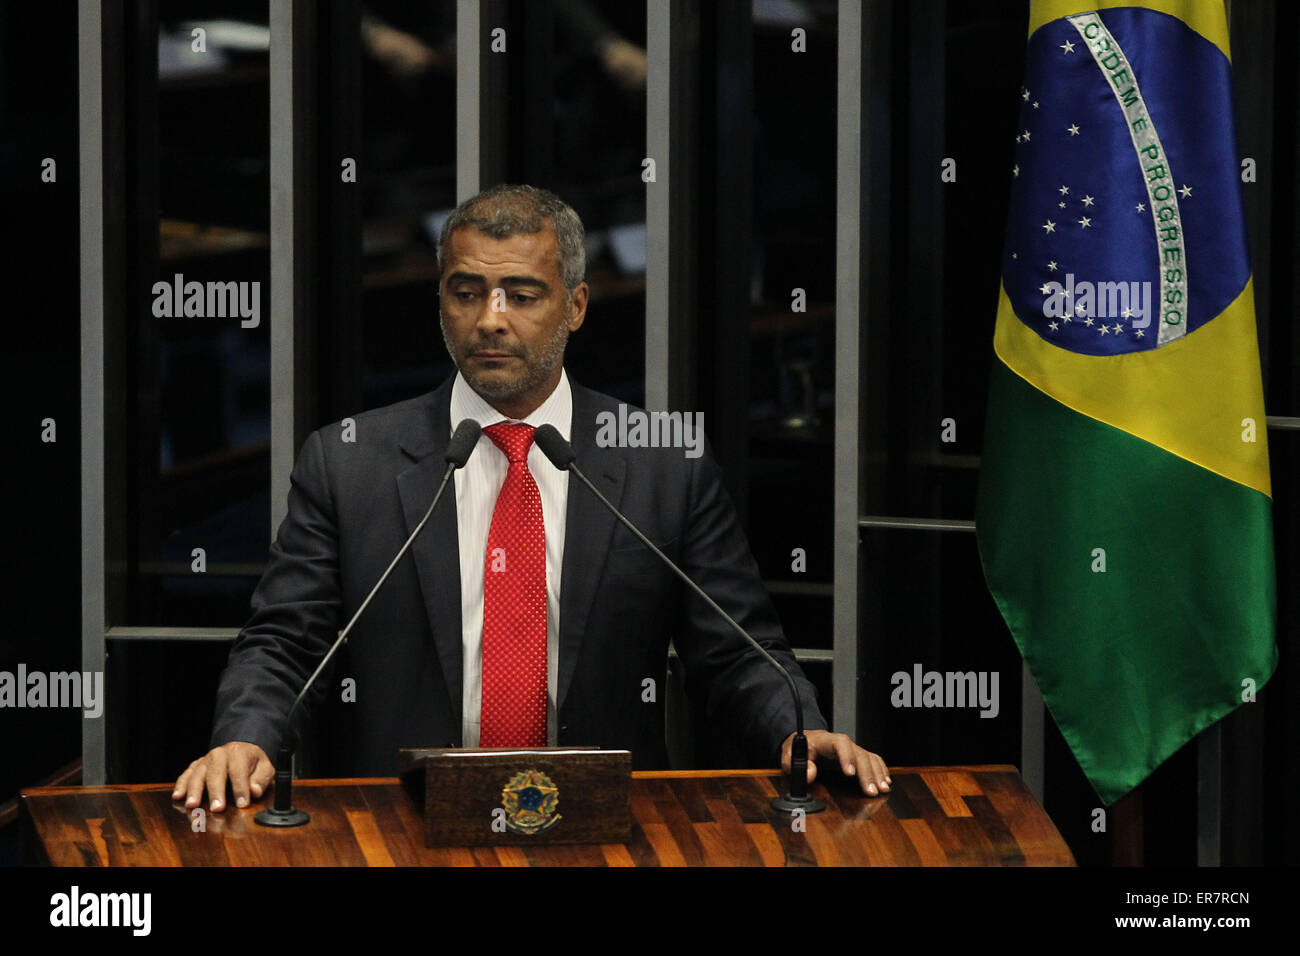 Brasilia, Brazil. 28th May, 2015. The senator and former Brazilian player Romario takes part in a plenary session of the Senate in Brasilia, Brazil, on May 28, 2015. The Brazilian Senate on Thursday approved the request made by former soccer star and now Senator Romario for the creation of a congressional panel to investigate corruption in soccer. Credit:  Dida Sampaio/AGENCIA ESTADO/Xinhua/Alamy Live News Stock Photo